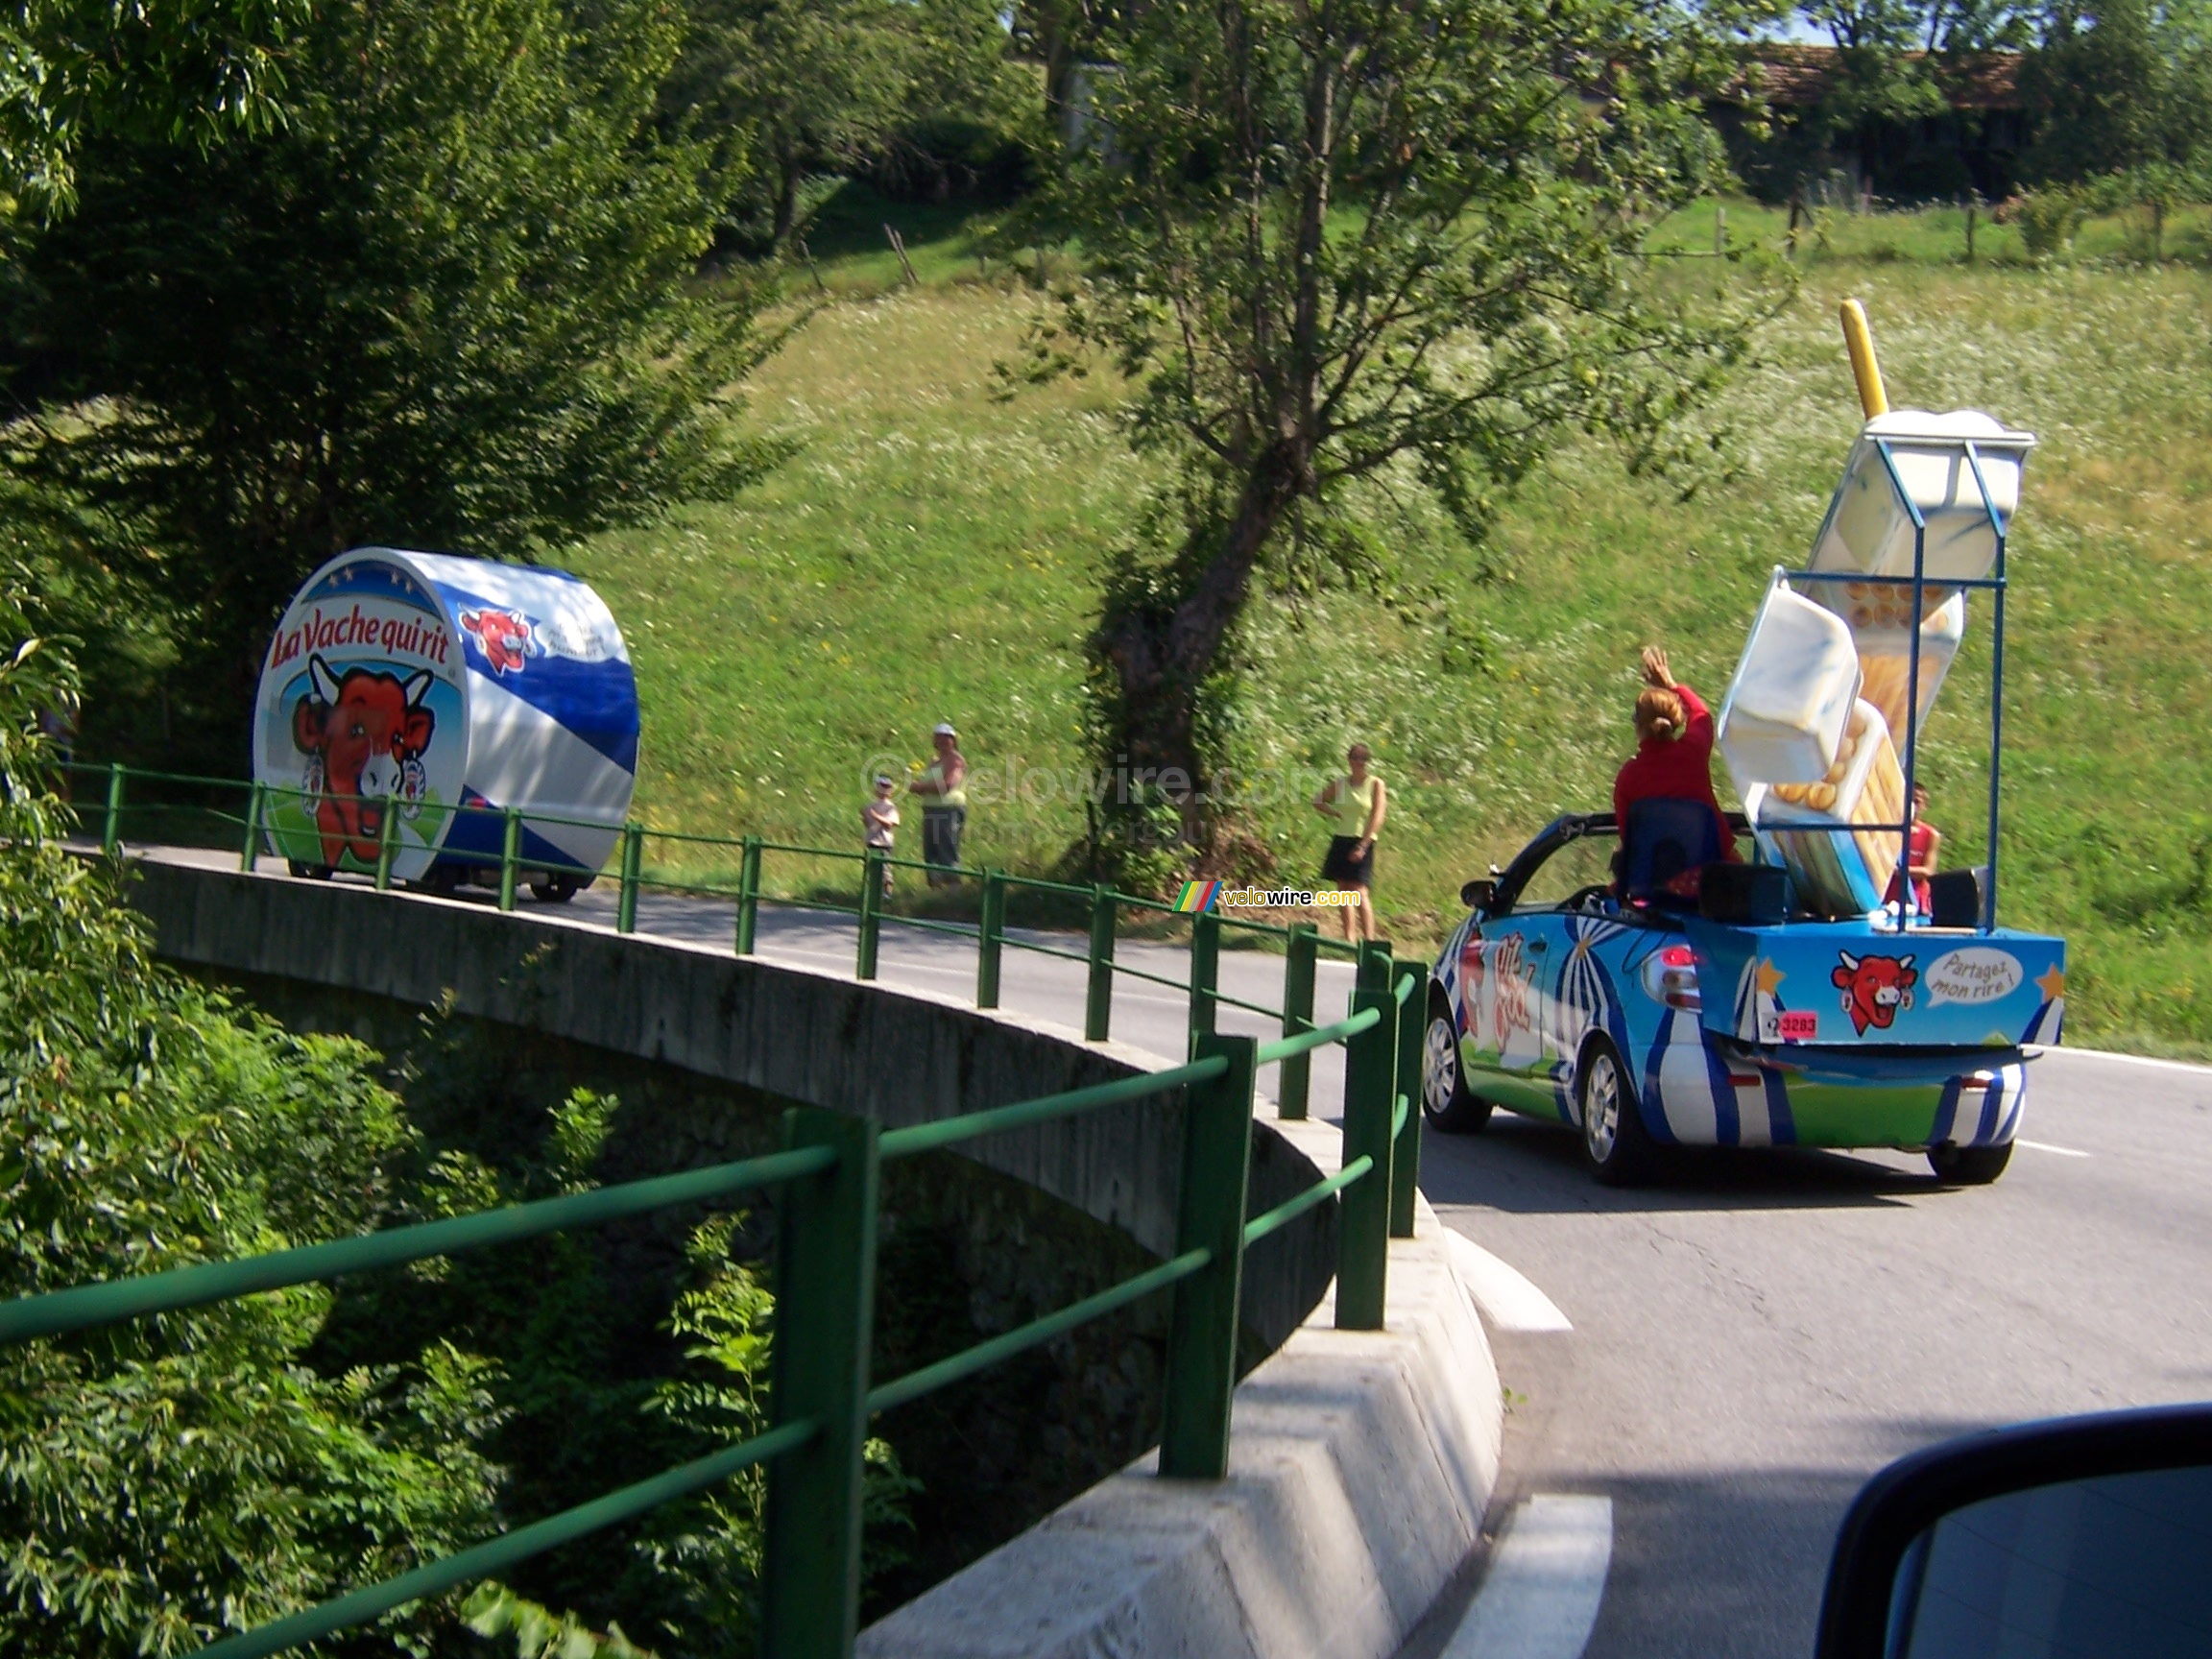 The La Vache Qui Rit packaging and one of the cars at the bend - [1 day in the La Vache Qui Rit 